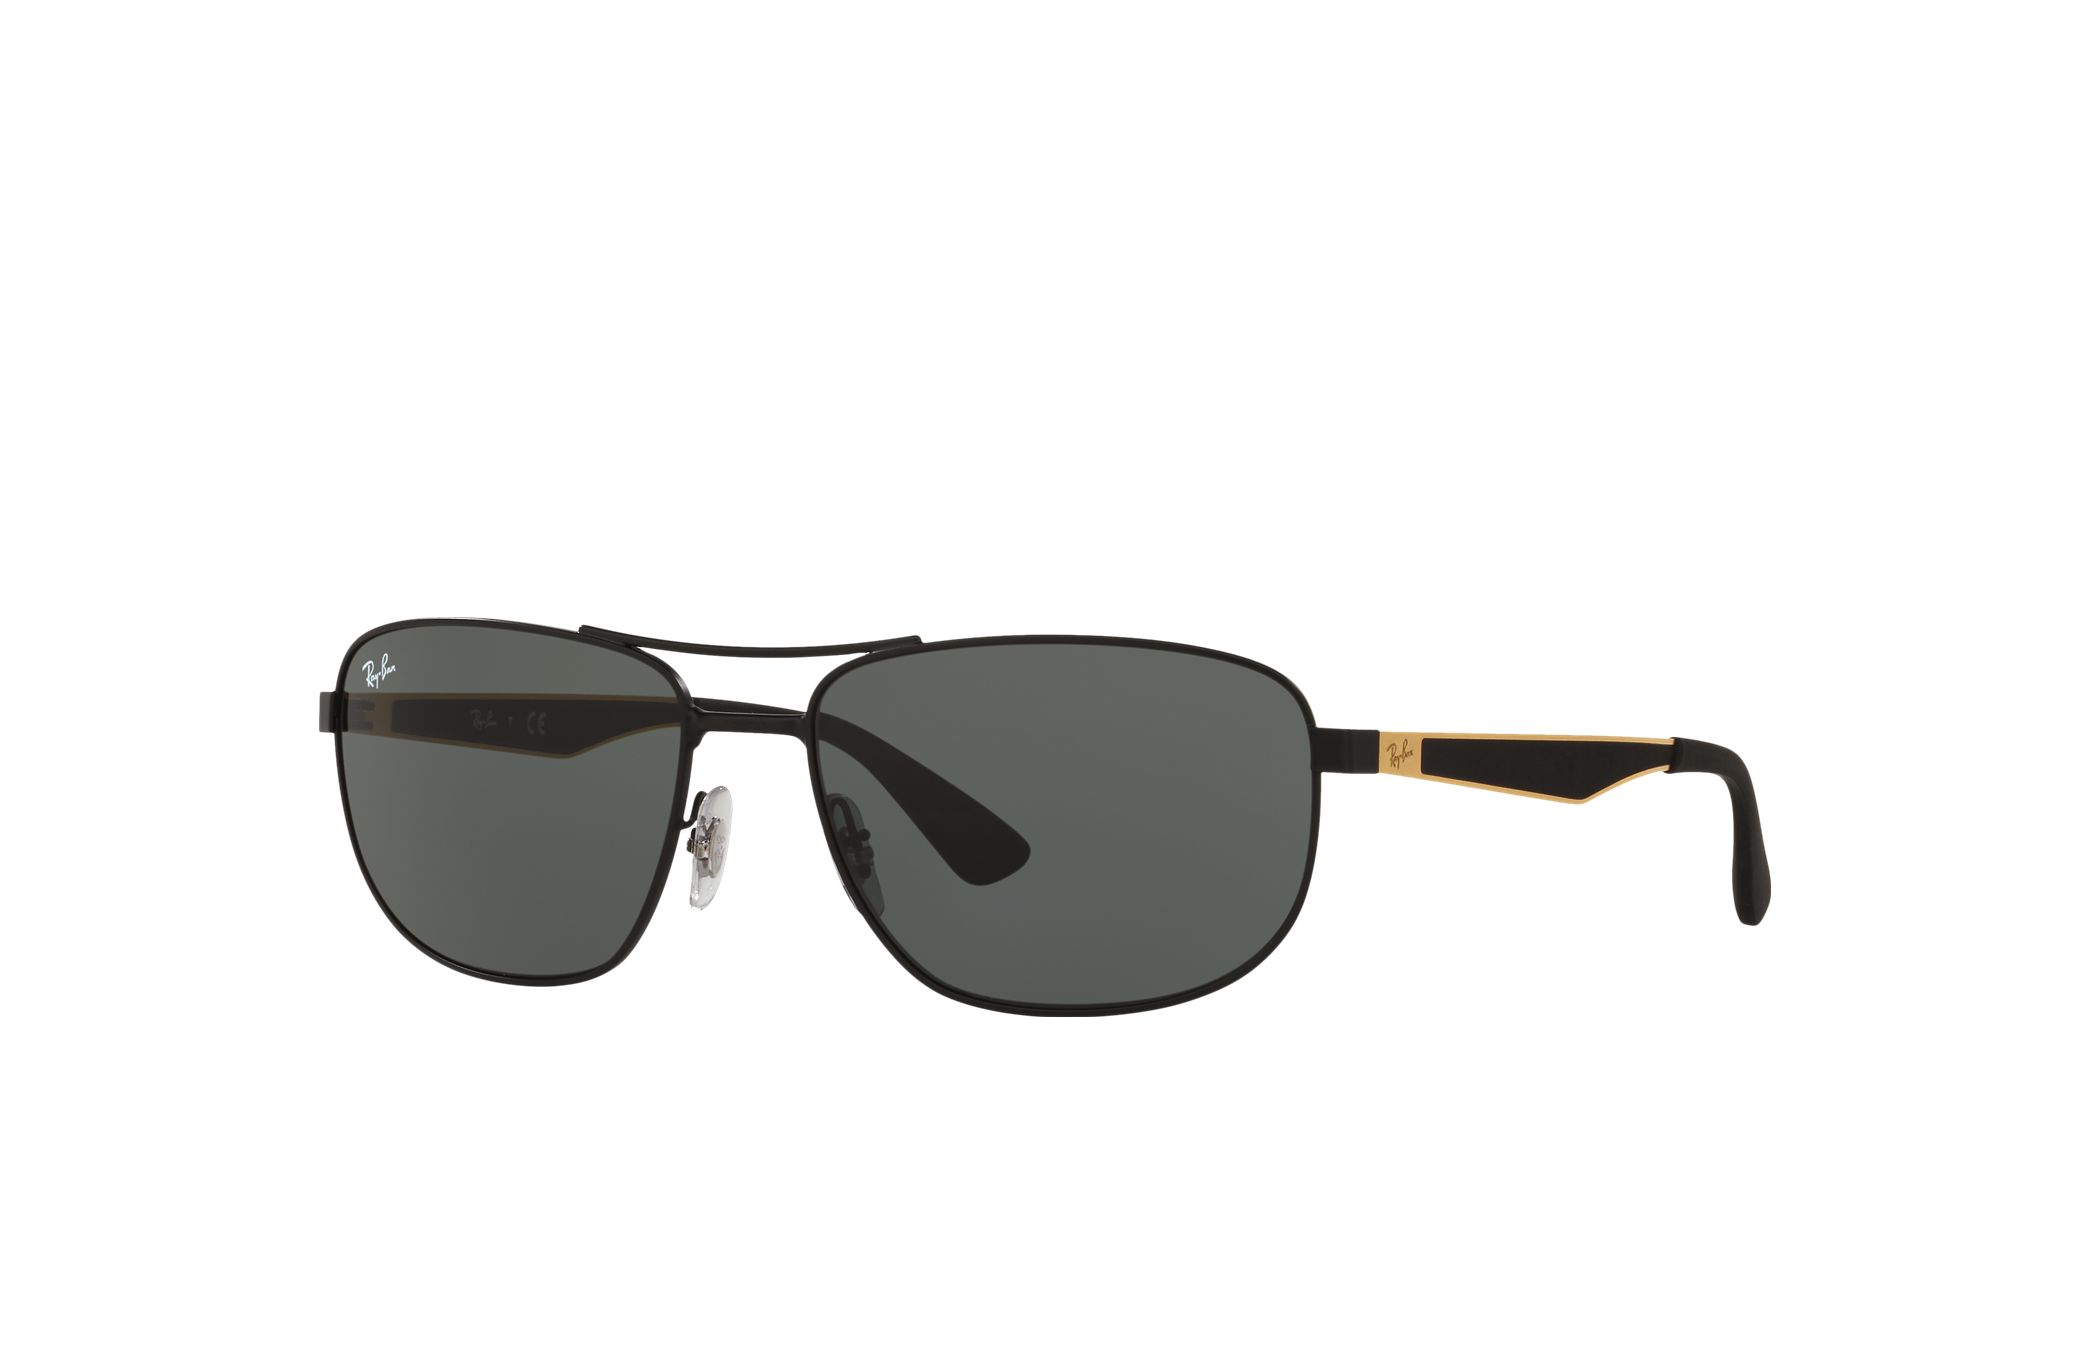 Rb3528 Sunglasses in Black and Green - RB3528 | Ray-Ban®